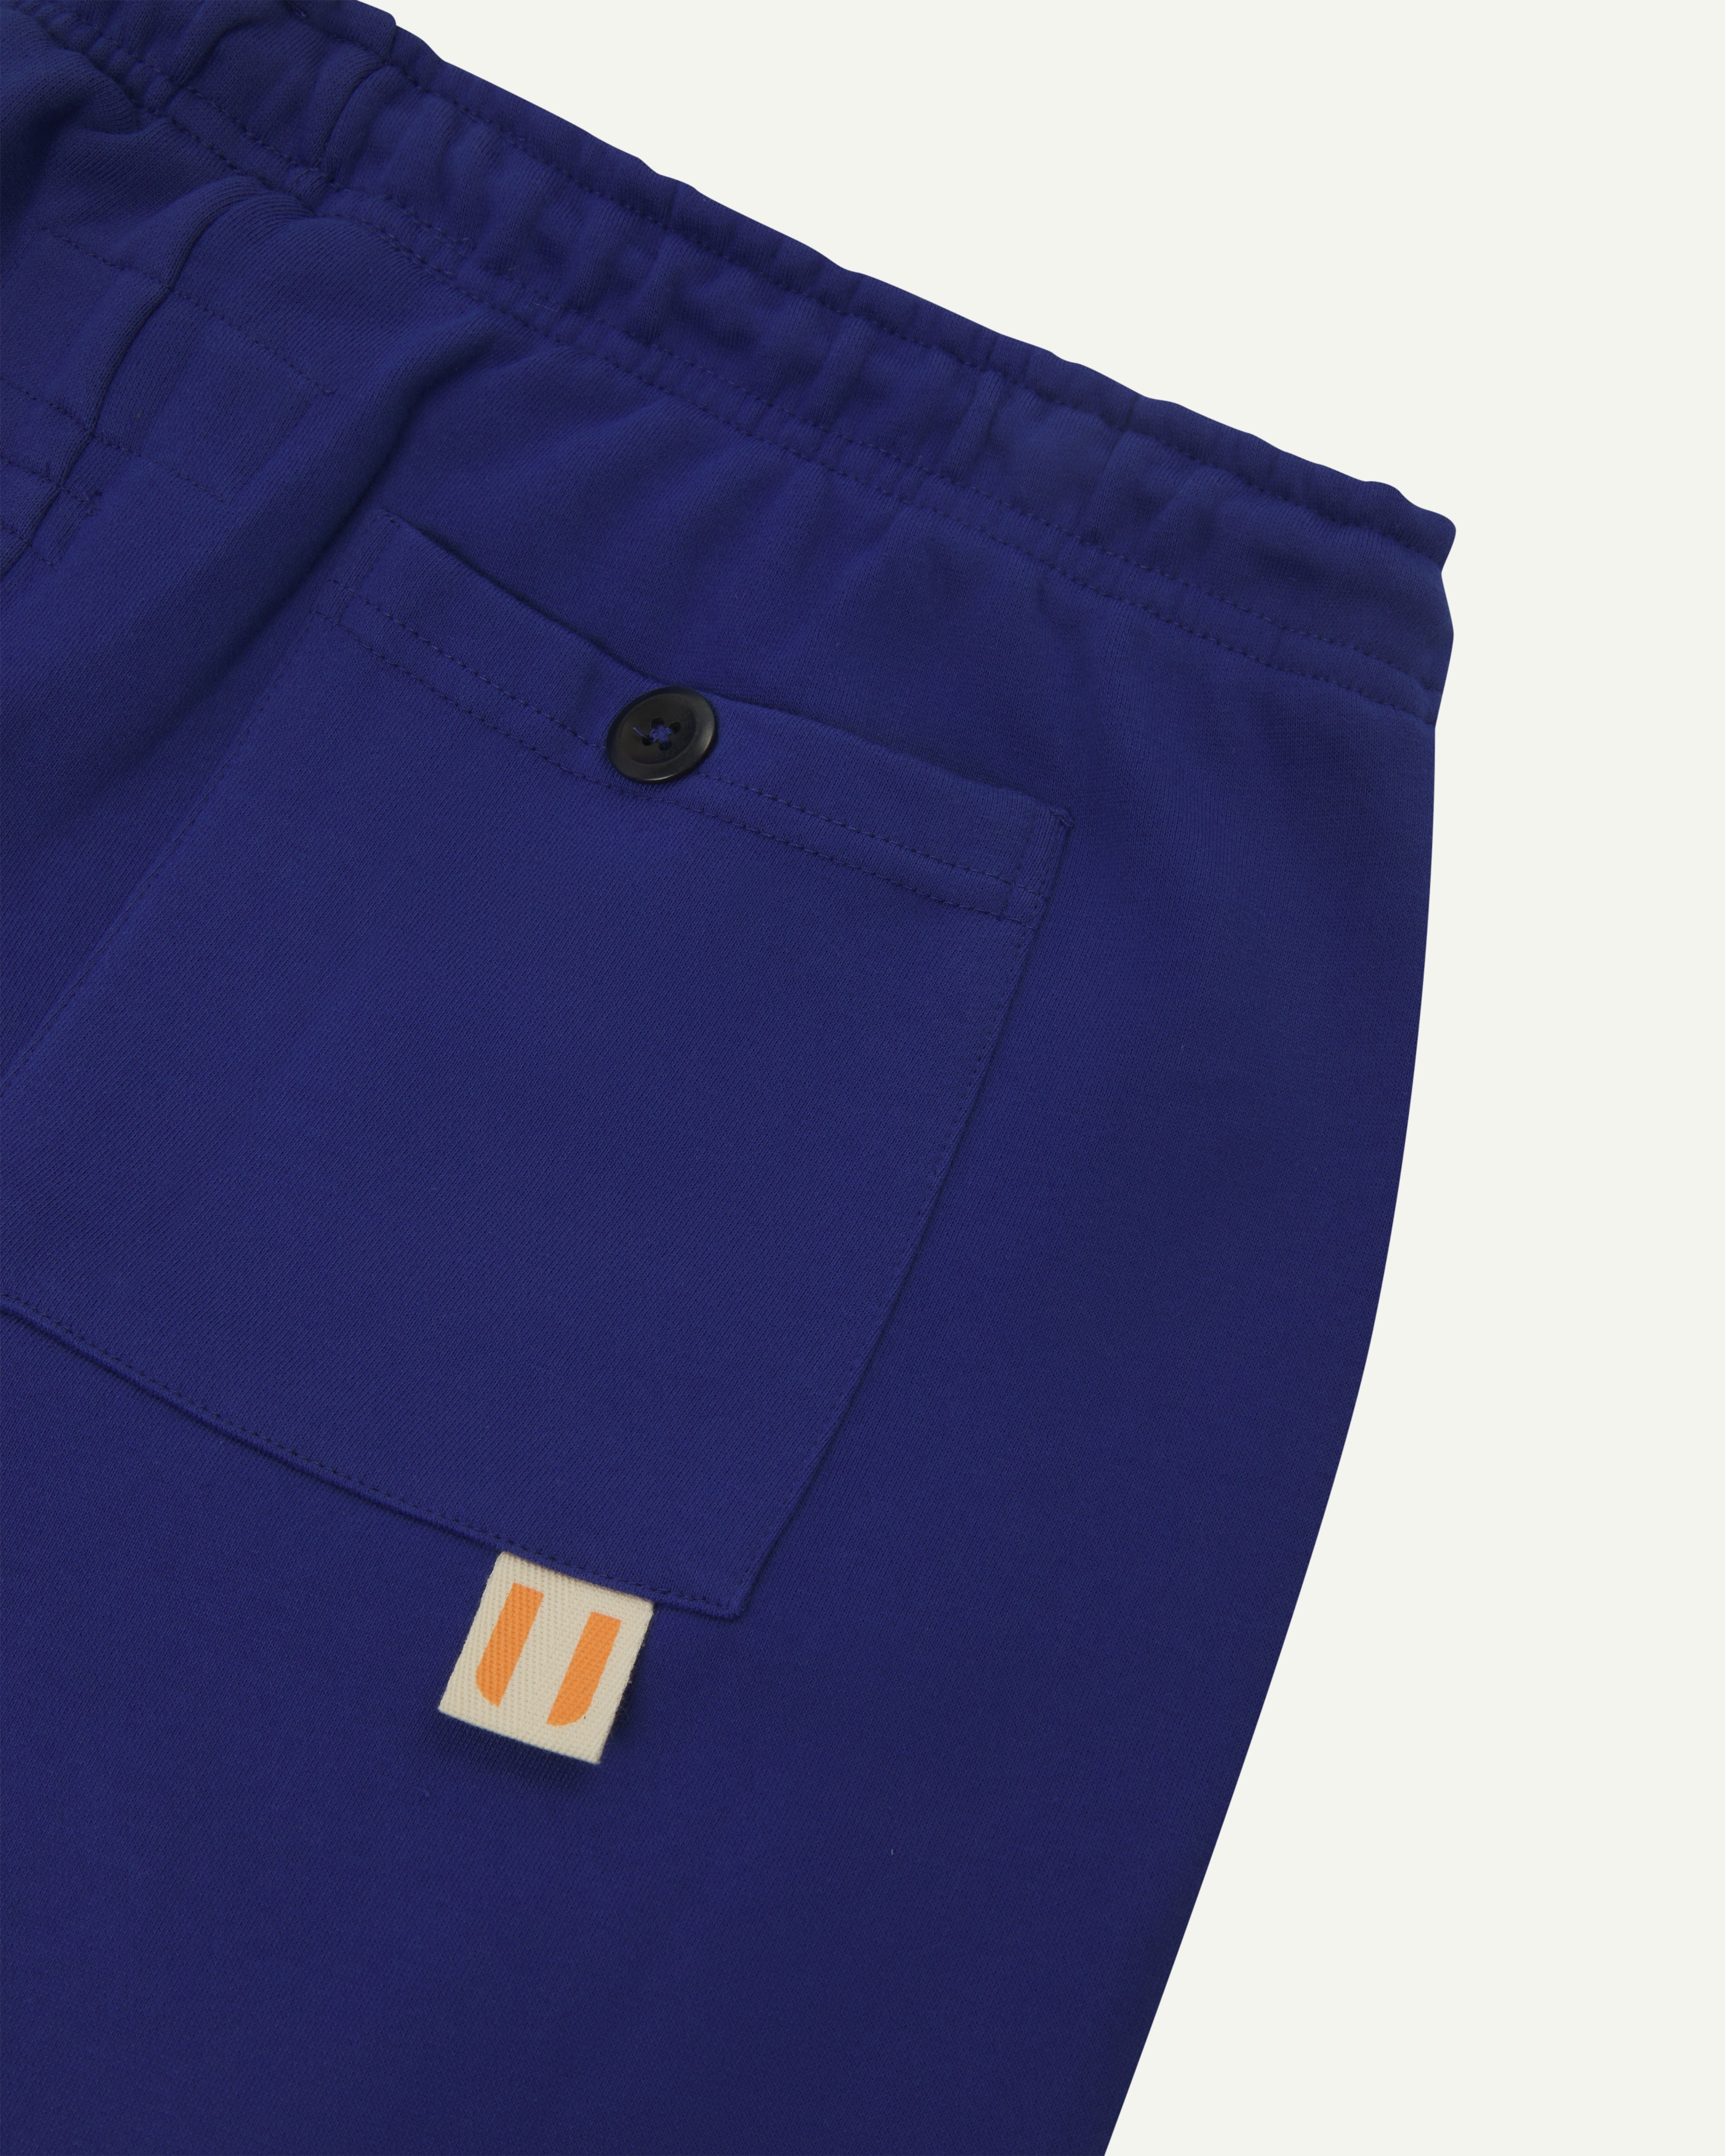 Back close view of bright blue organic cotton Jogging Pants for men by Uskees showing buttoned back pocket and logo label.